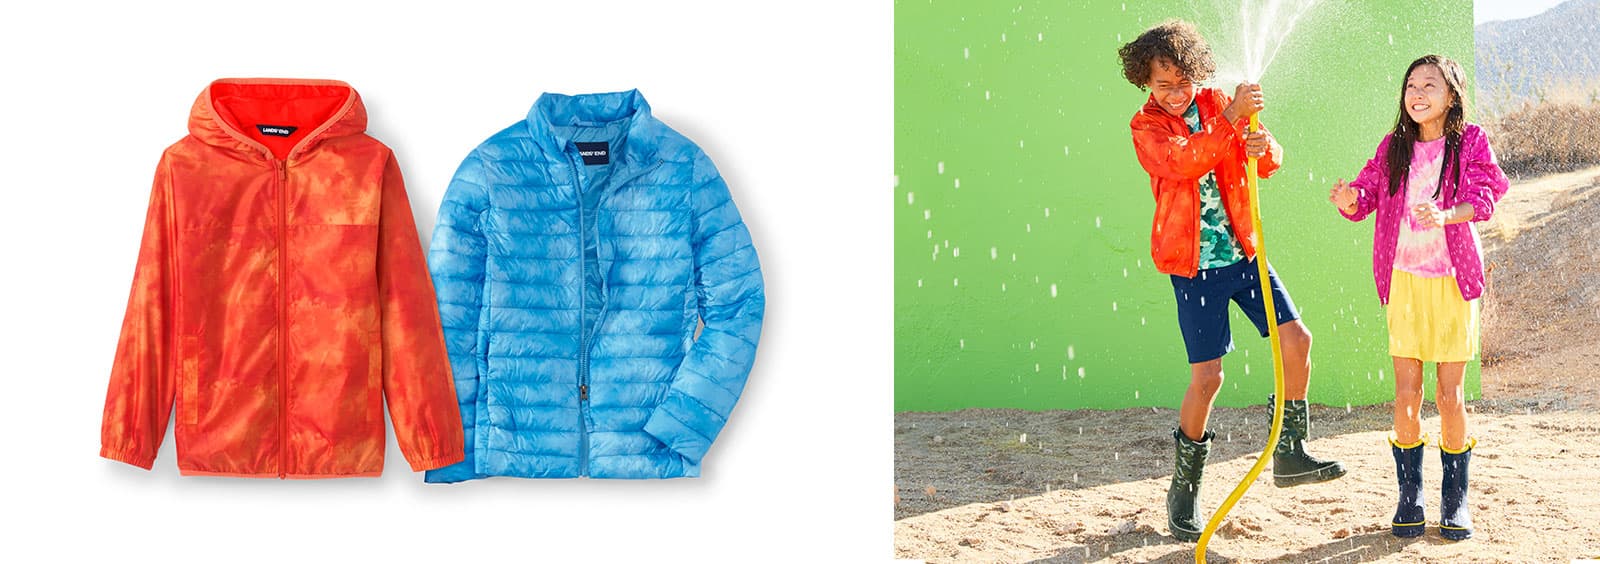 Best Raincoat to Send Your Kid to School In | Lands' End